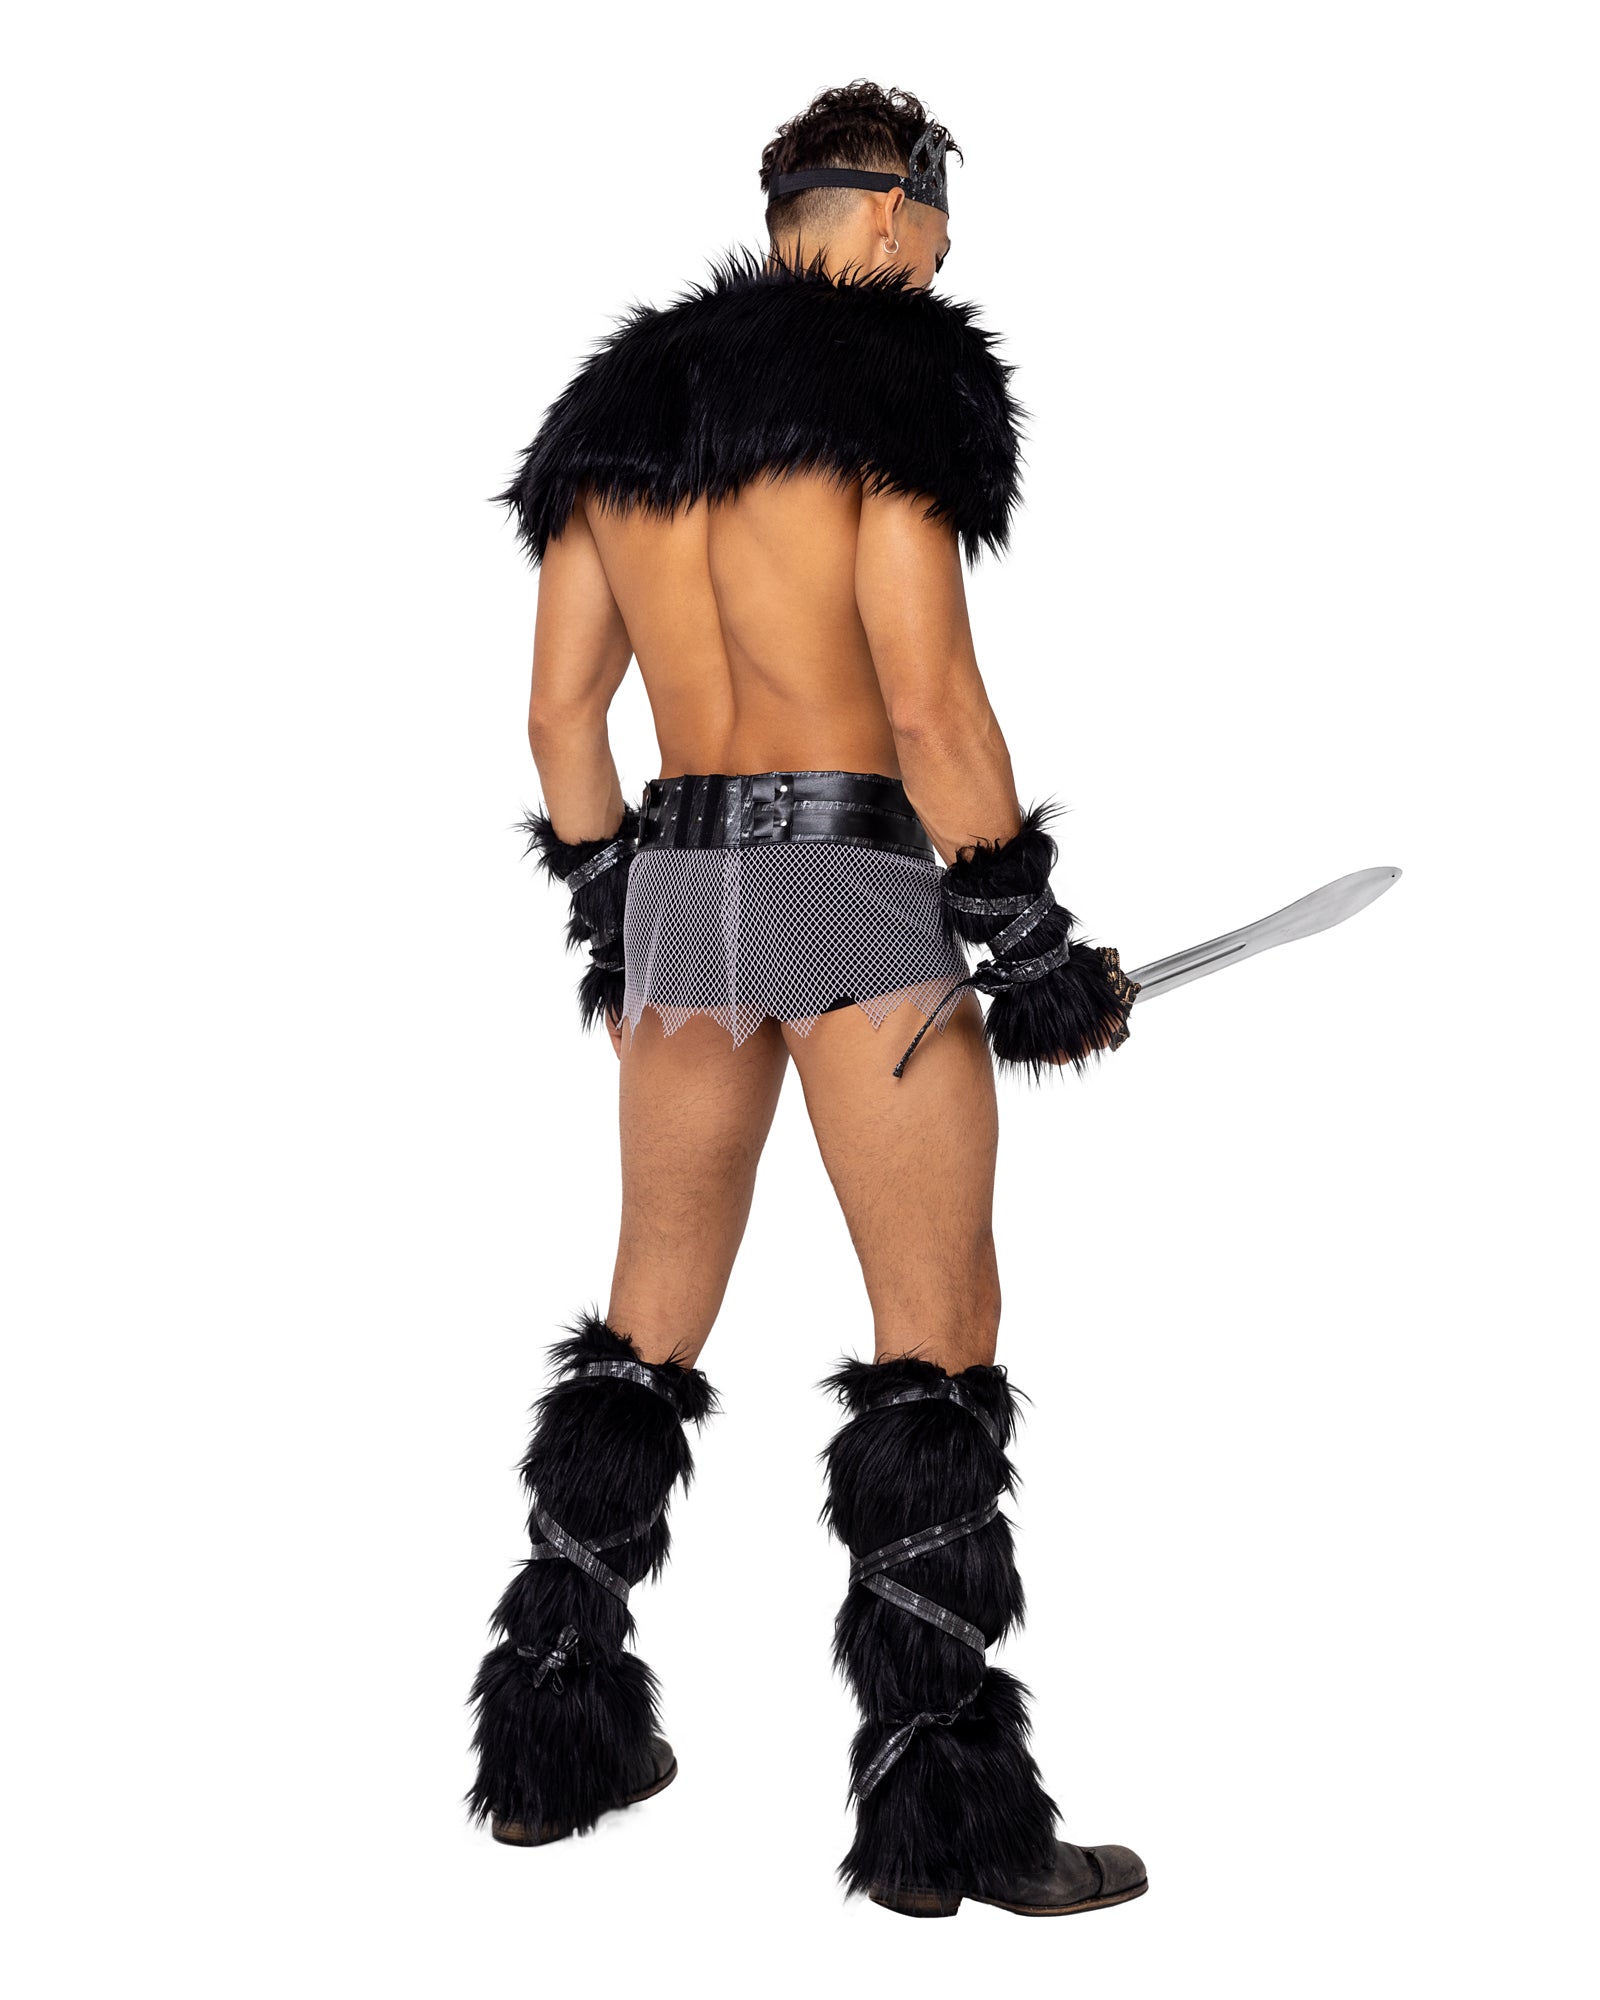 Viking Hunk Men Costume by Roma Costumes only at  TeeJayTraders.com - Image 2